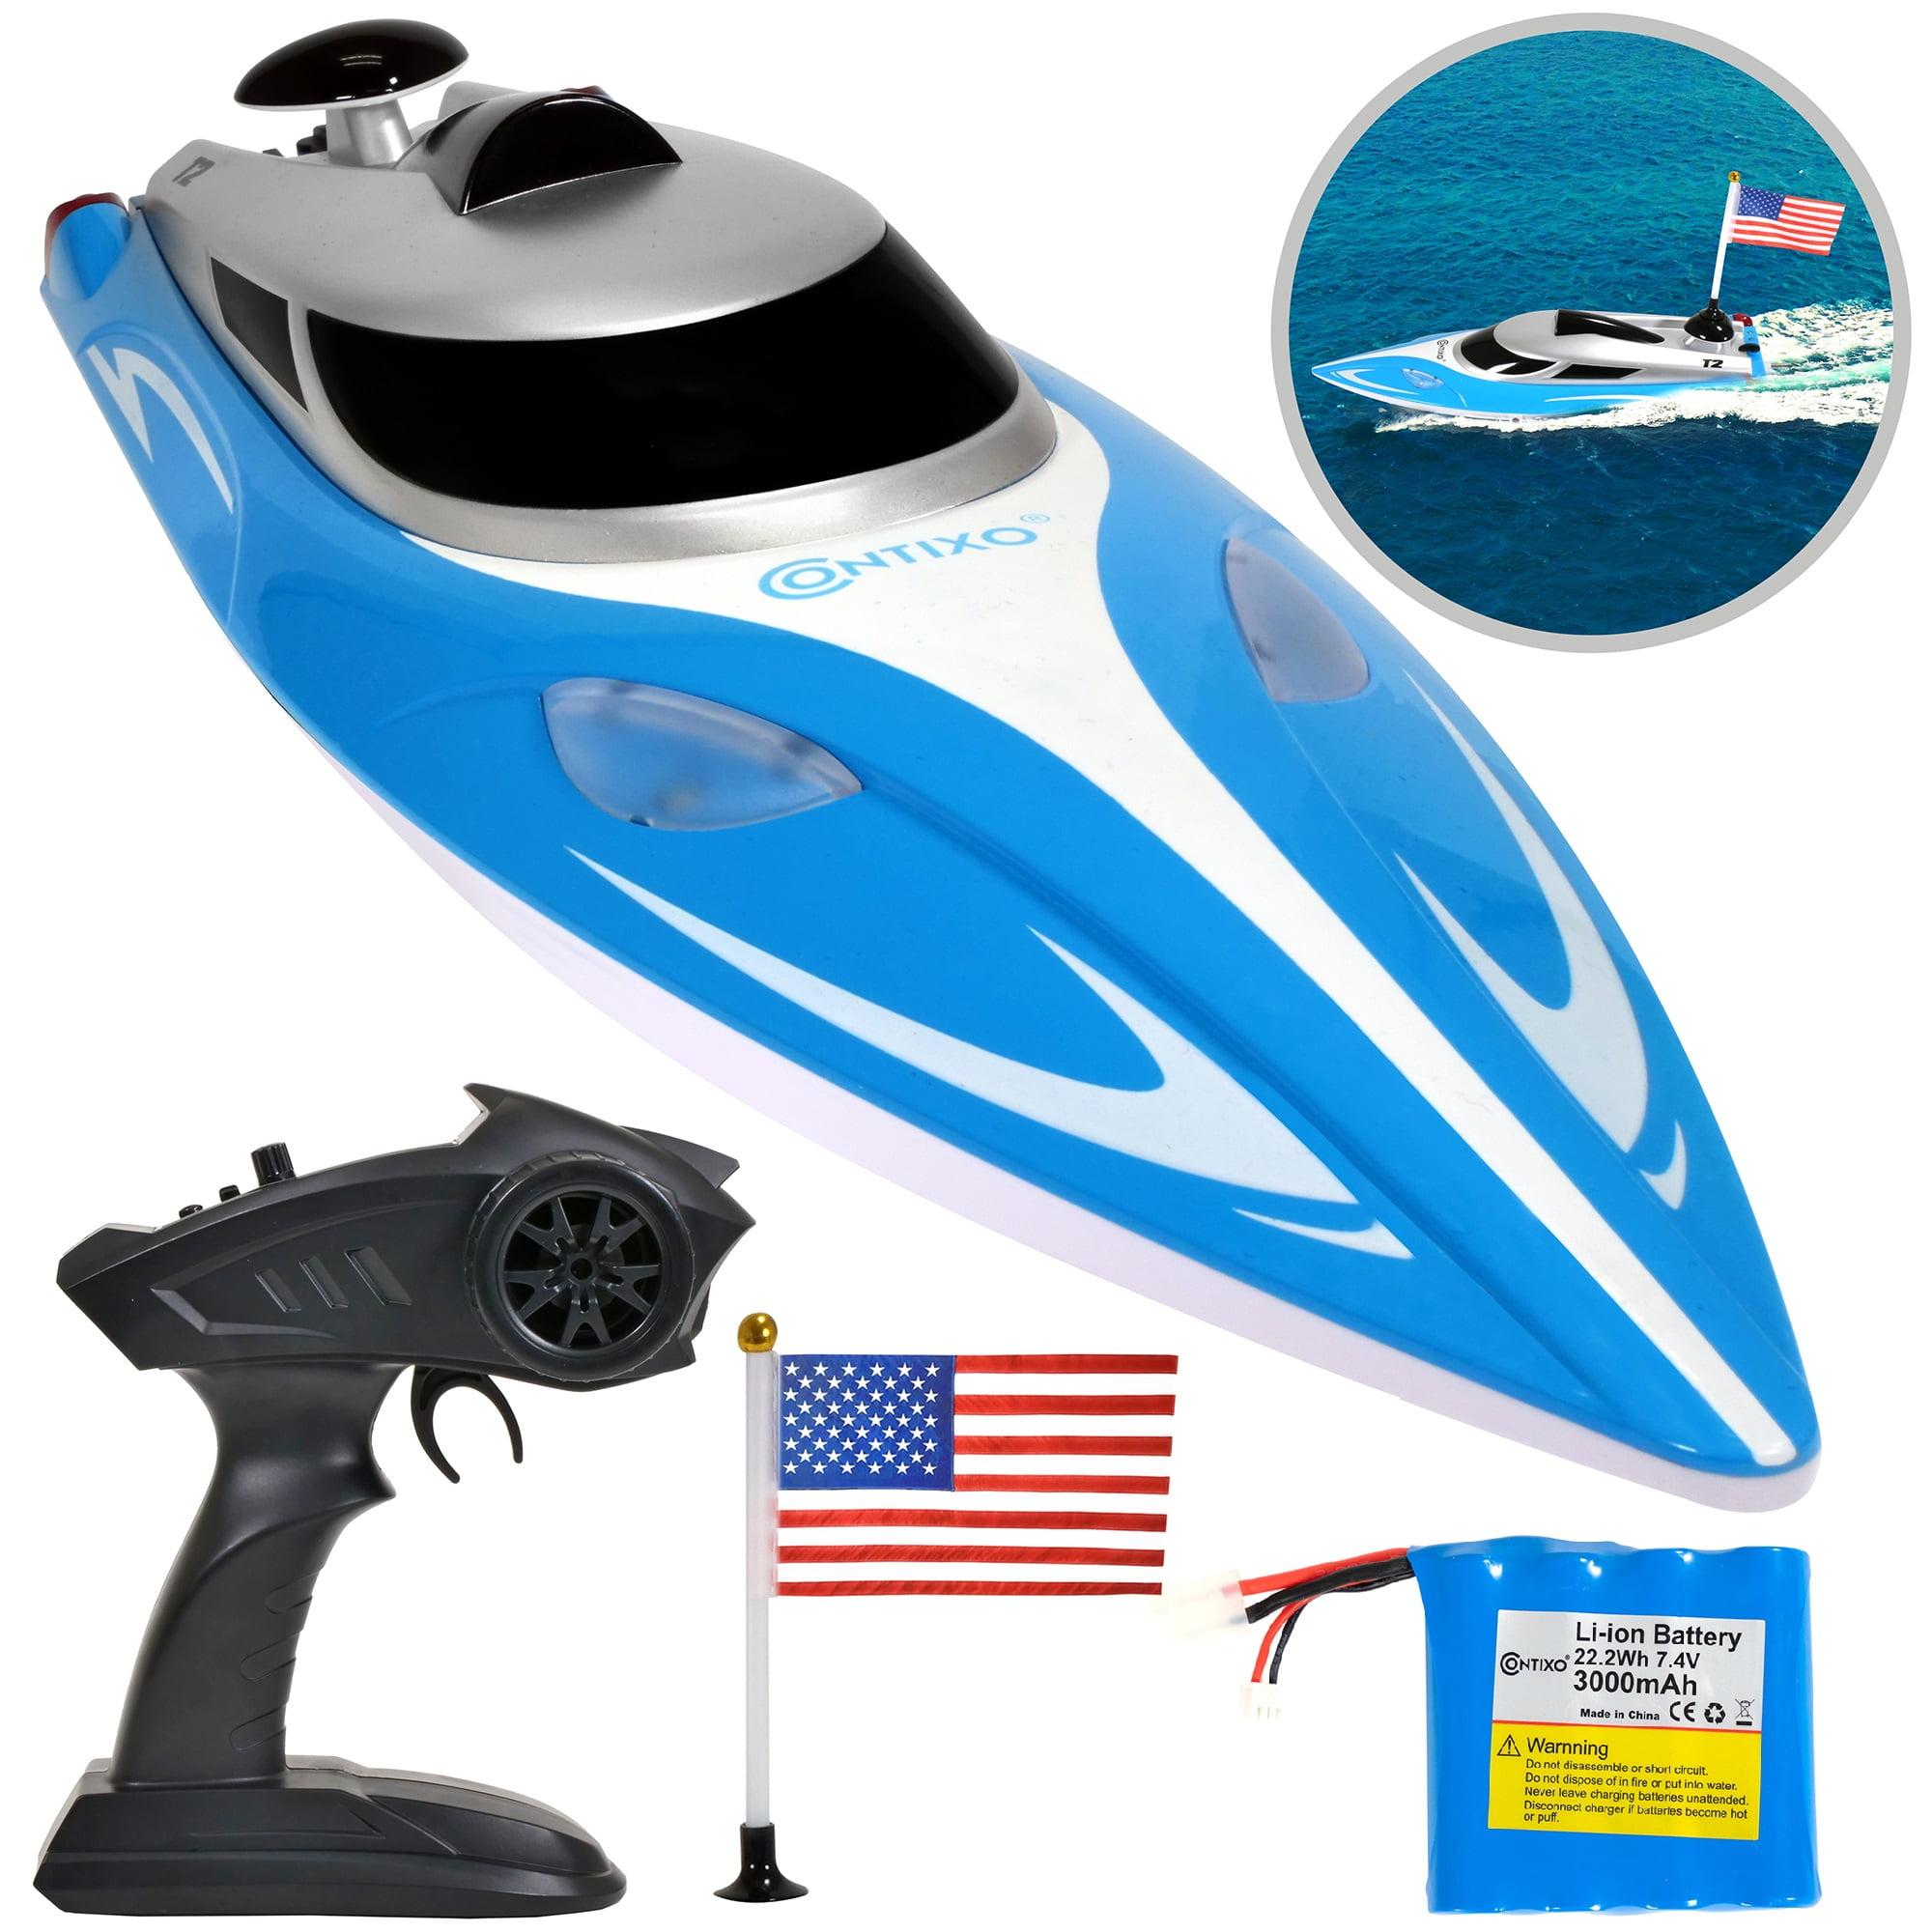 Control Boat Remote Control Boat: Control boat remote control boats: a world of endless benefits, exciting racing, and stress-relieving relaxation.